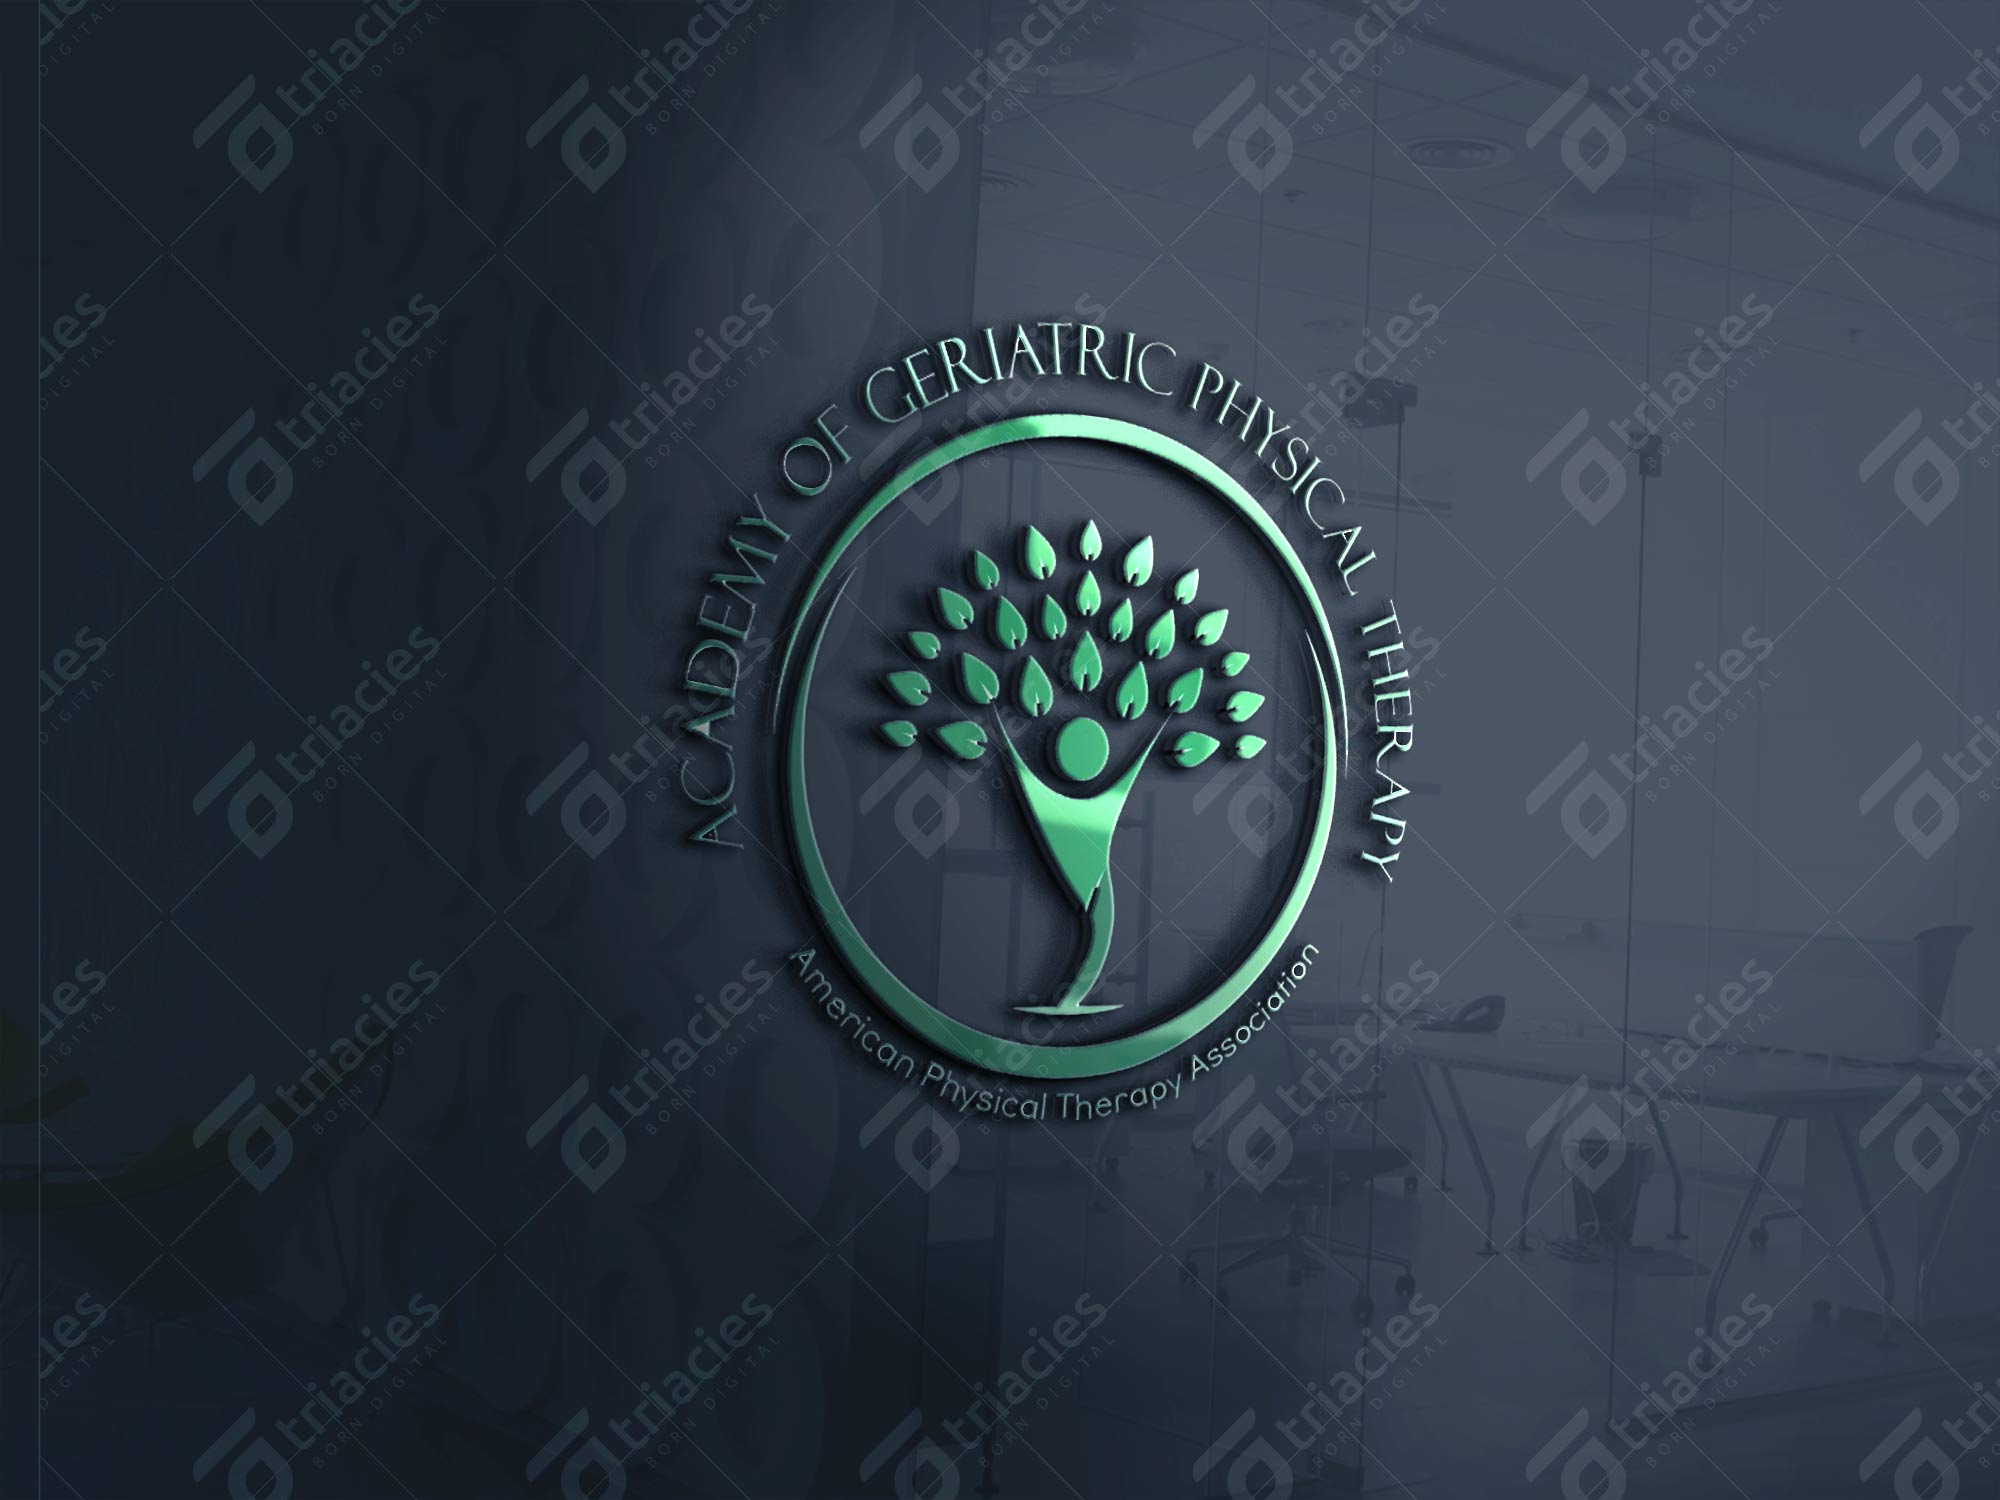 American Physical Therapy Association Logo - Triacies. Logo Design for American Physical Therapy Association